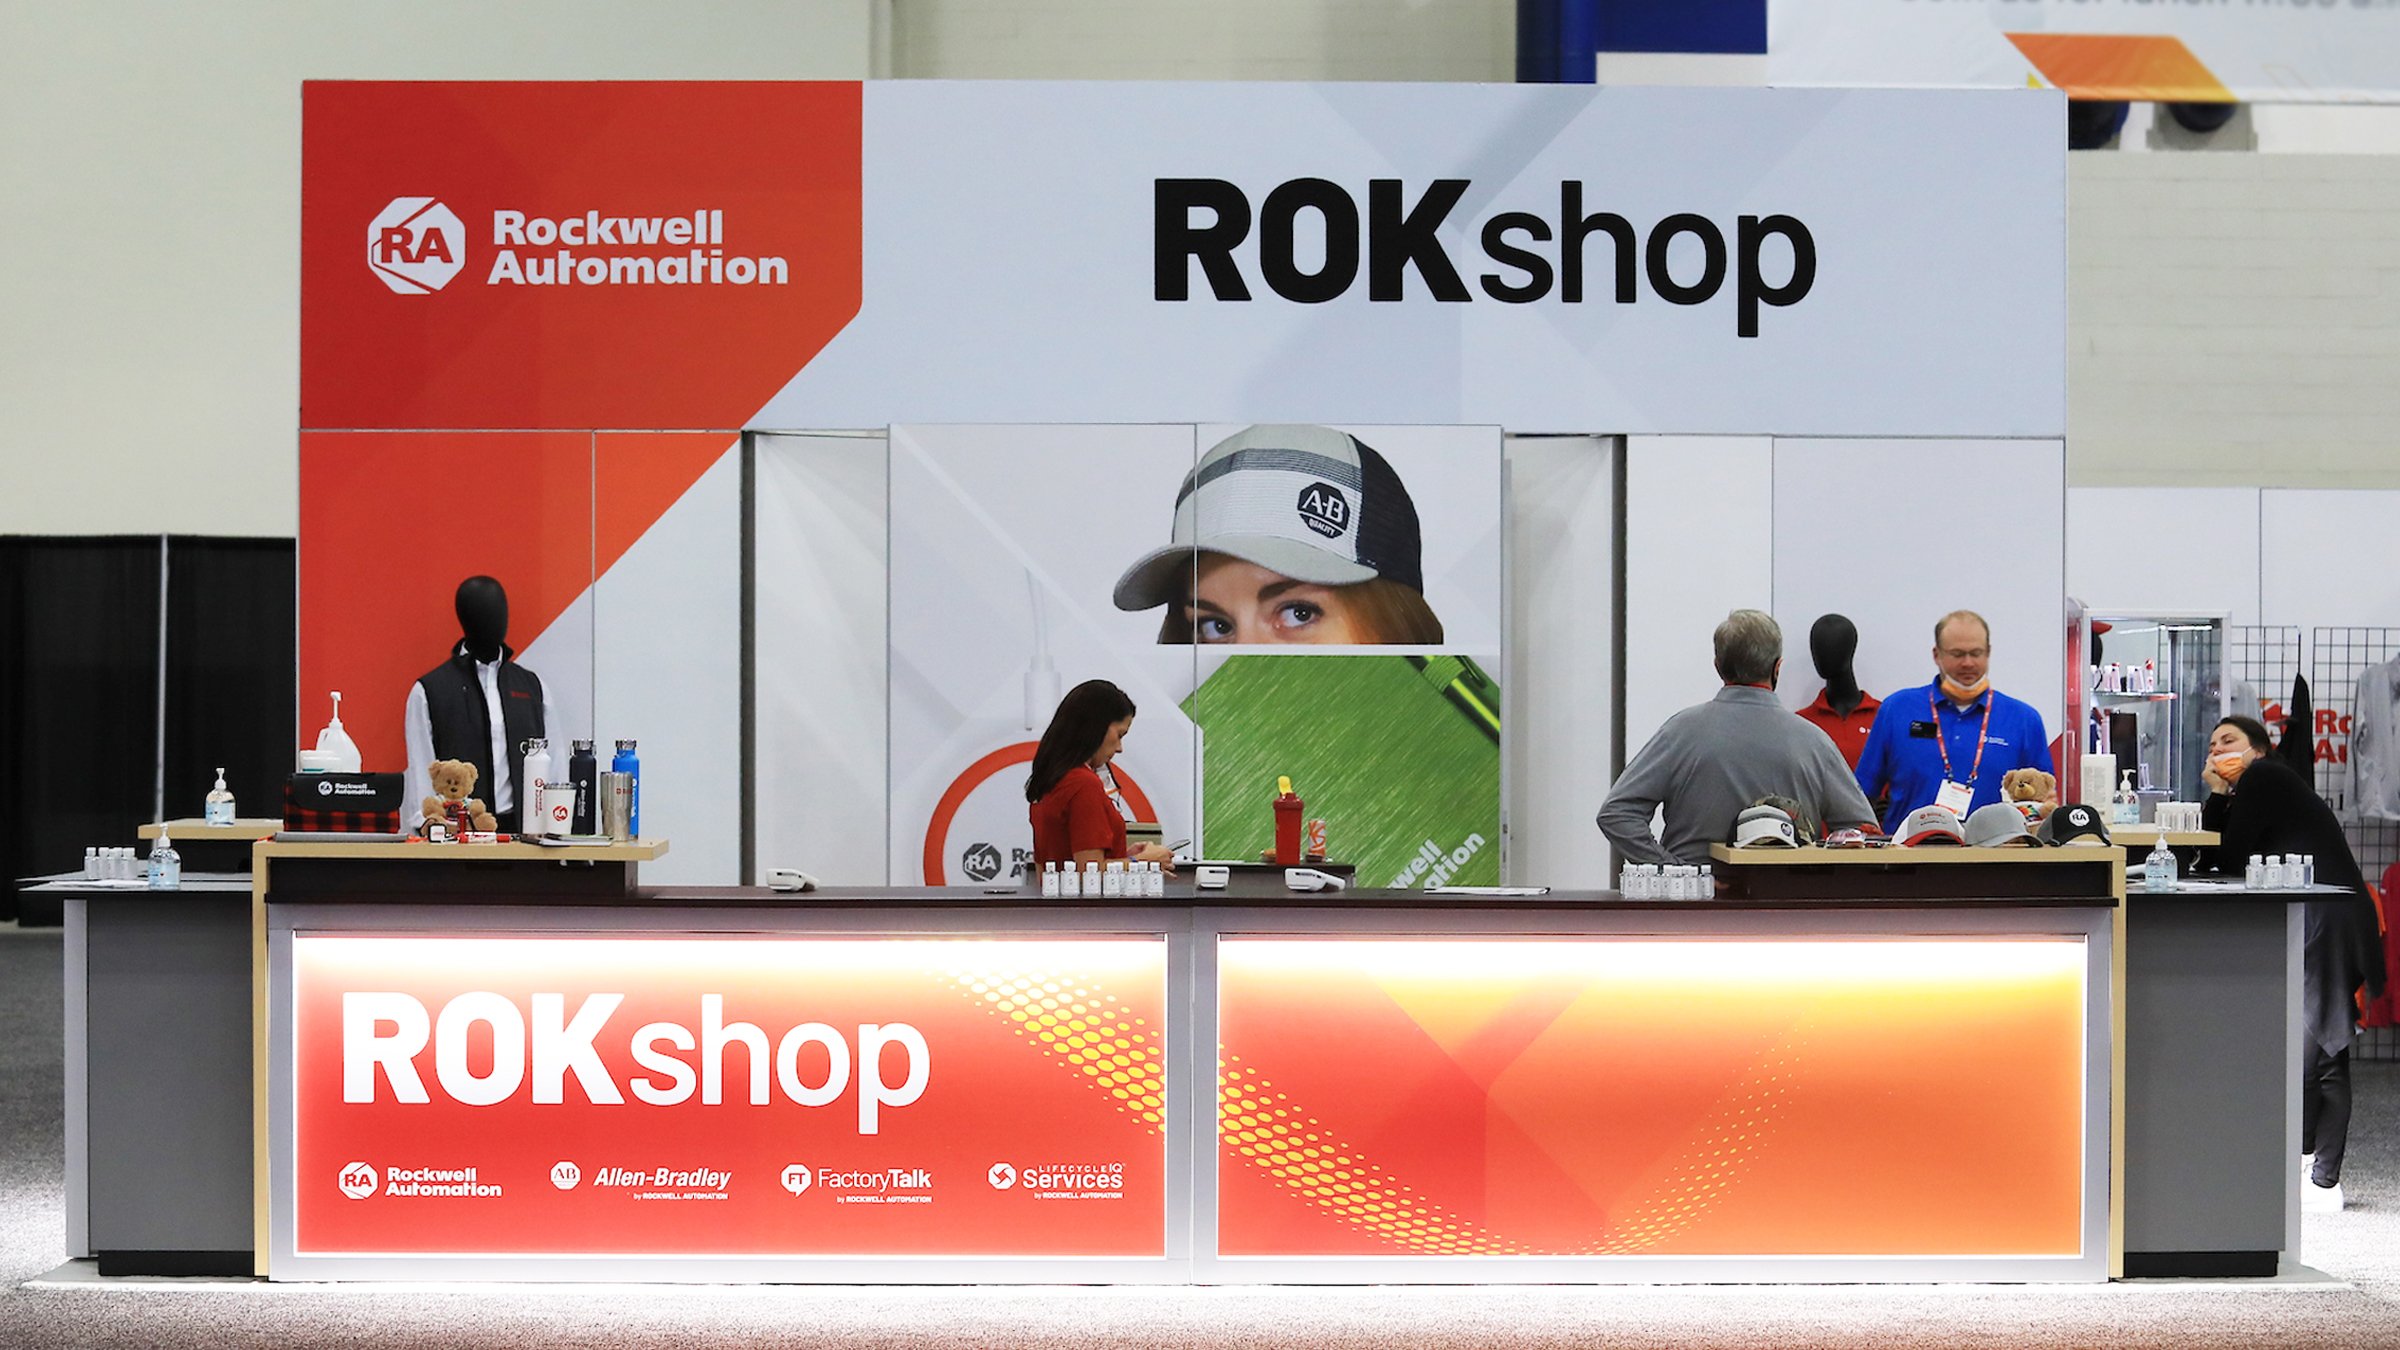 The Rockwell Automation ROKShop store at an event with people standing behind the counters and merchandise in the background.